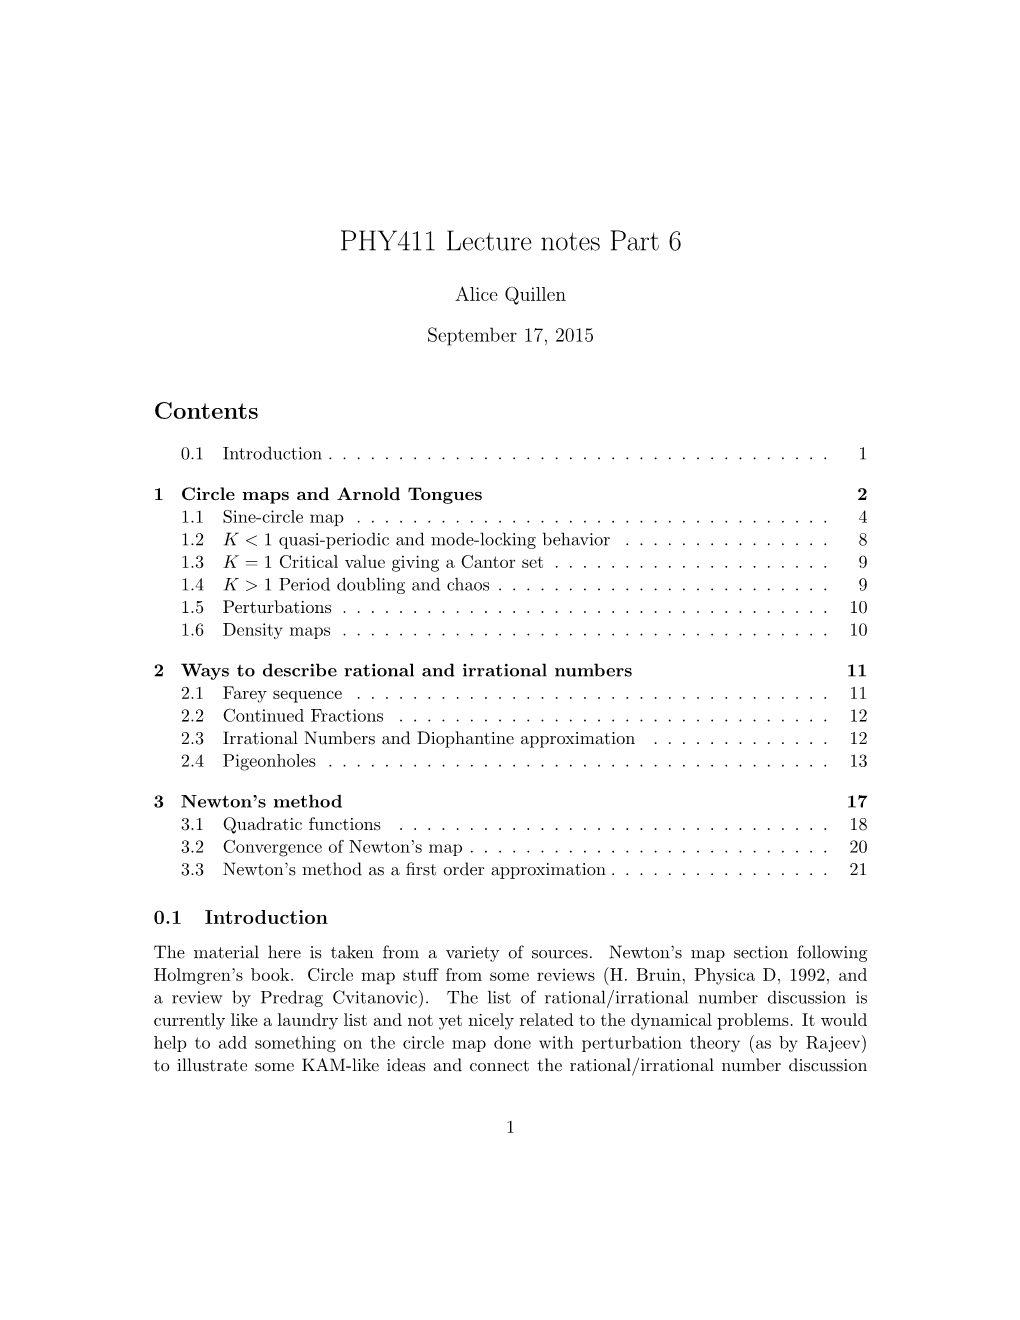 PHY411 Lecture Notes Part 6